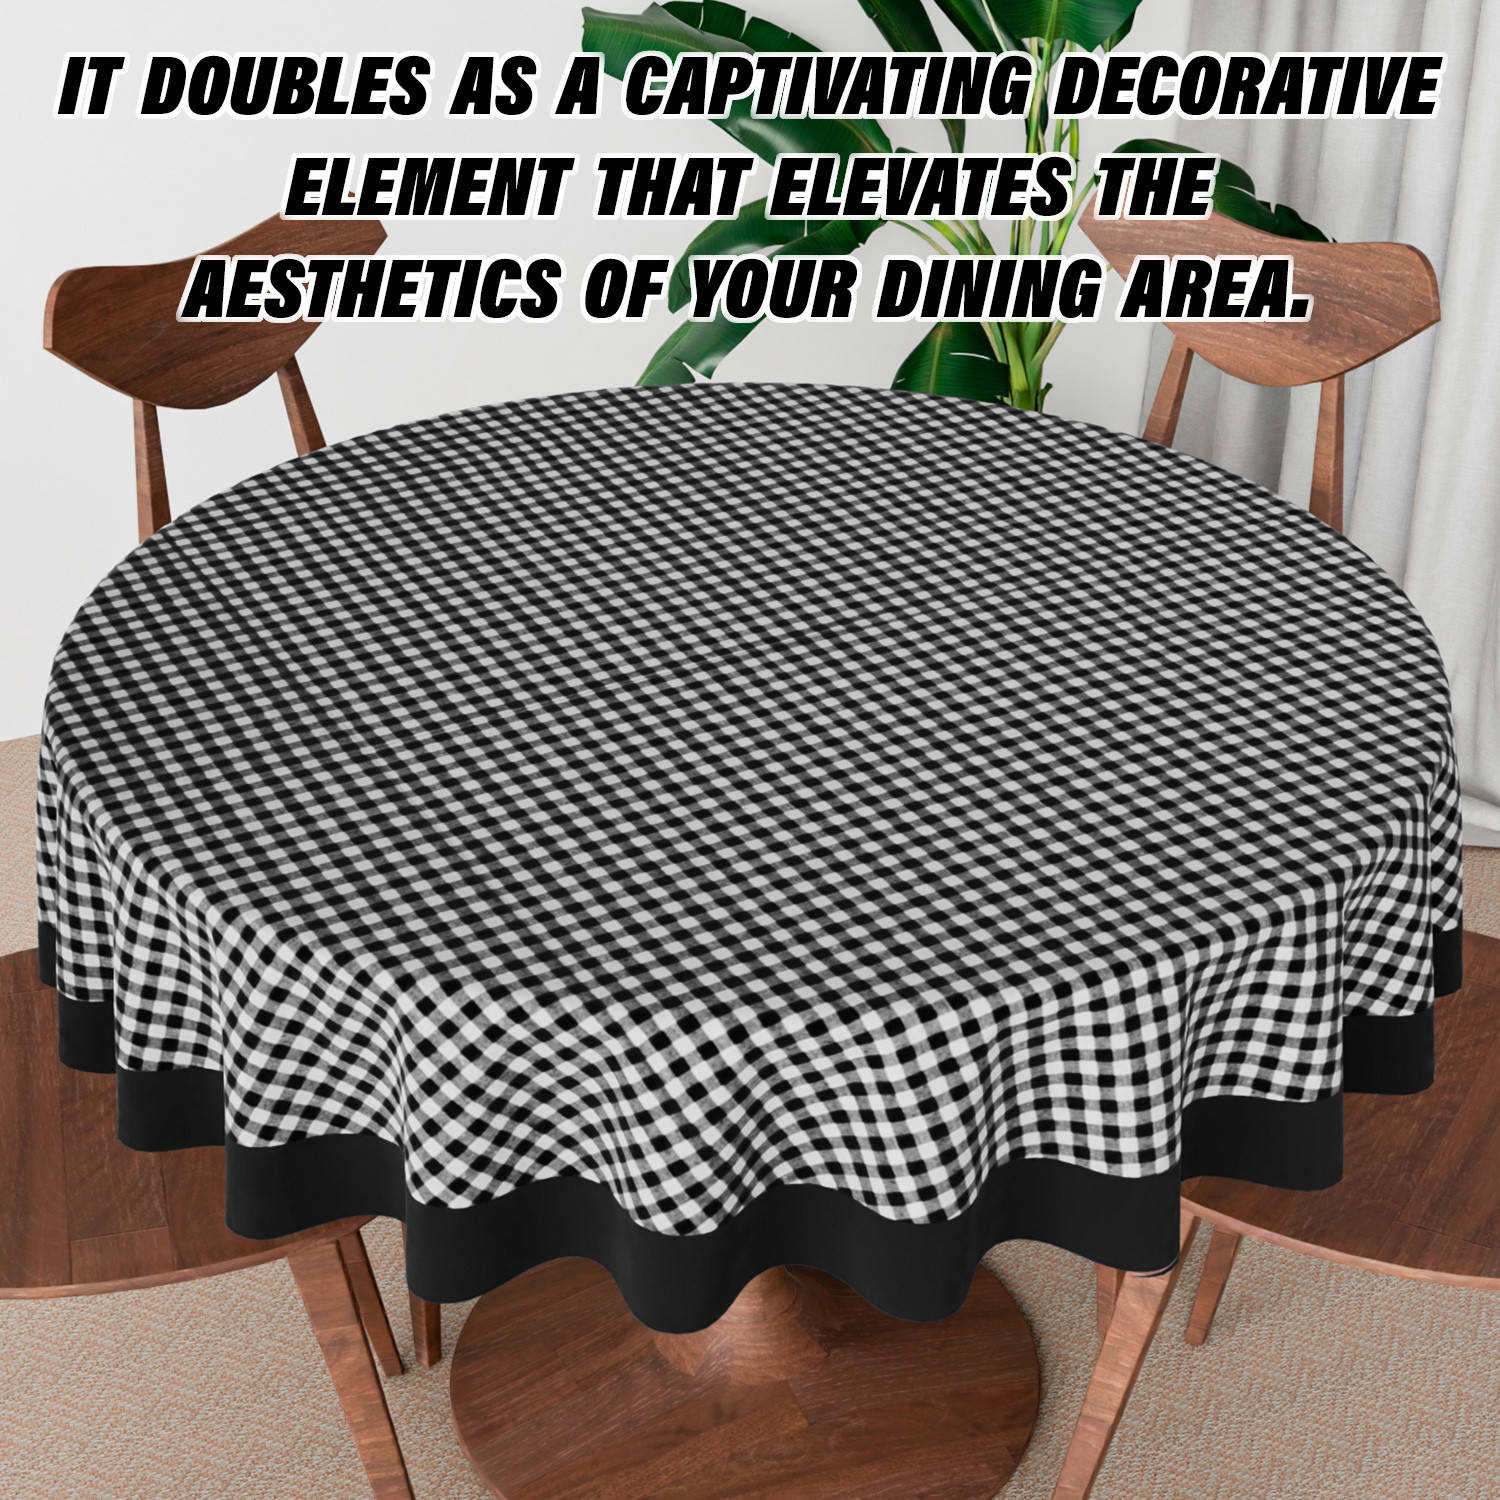 Kuber Industries Round Table Cover | Cotton Table Cloth for Round Tables | 4 Seater Round Table Cloth | Barik Check Kitchen Dining Tablecloth | Tabletop Cover | 60 Inch | Black